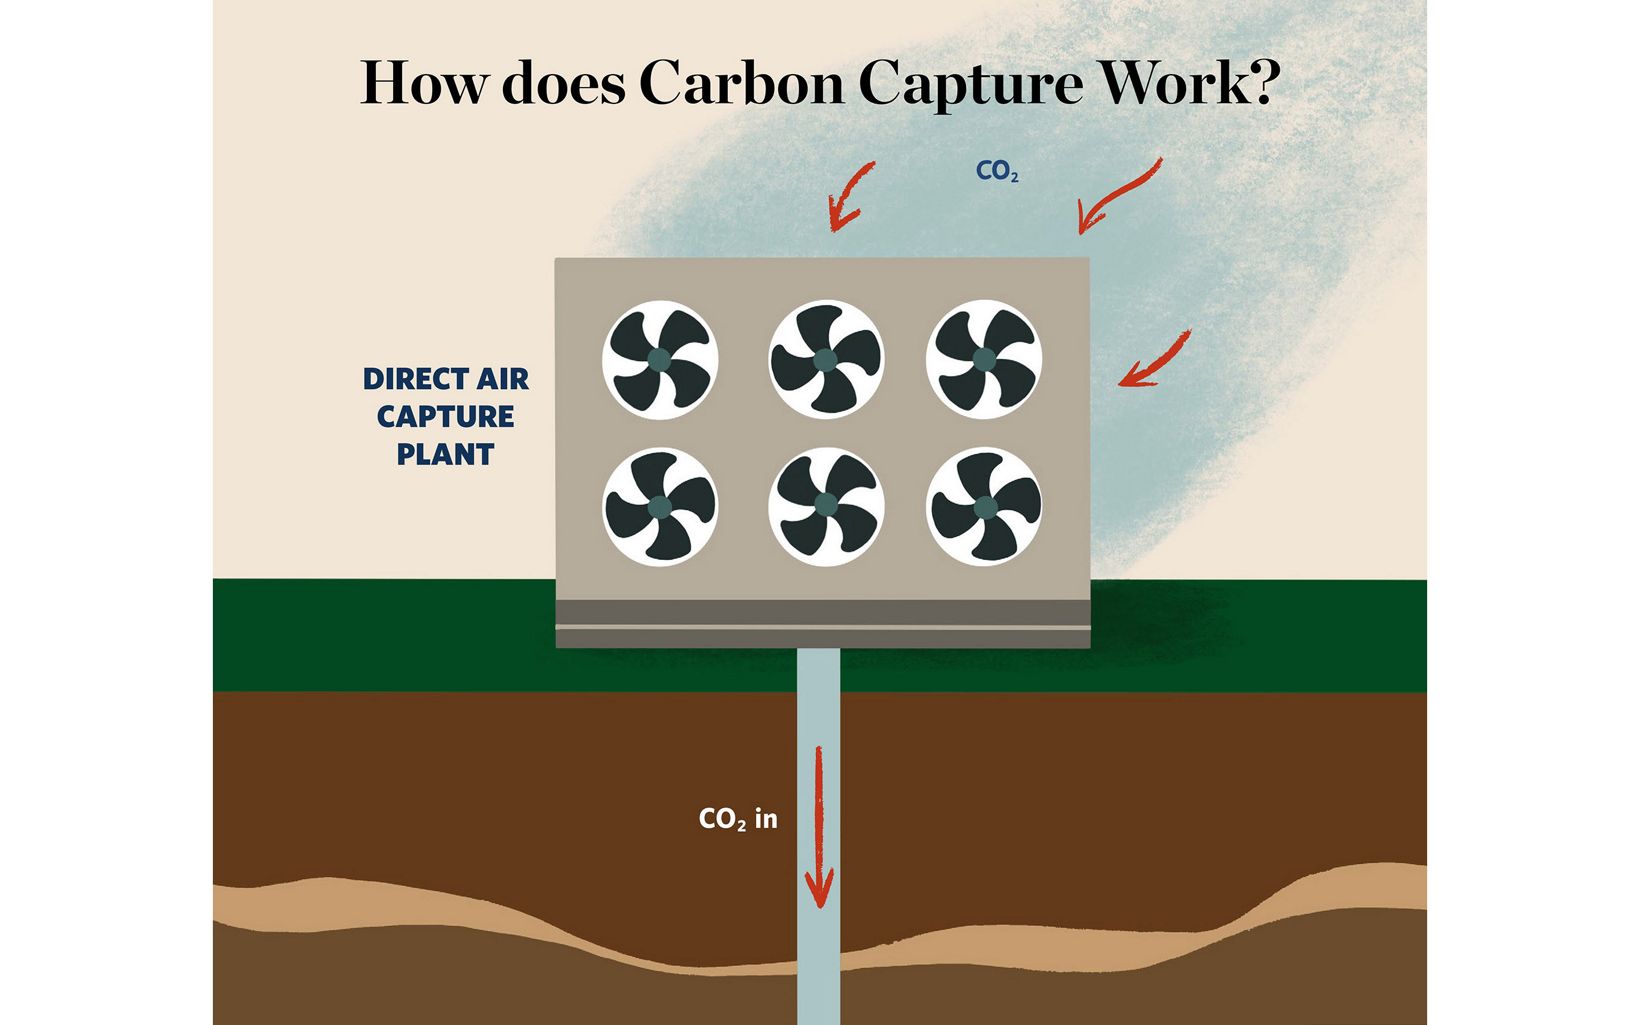 
                
                  Carbon Captured One way of capturing carbon dioxide is by pulling CO2 from the air, concentrating it into a liquid, transporting it, and pumping it into deep underground formations.
                  
                
              